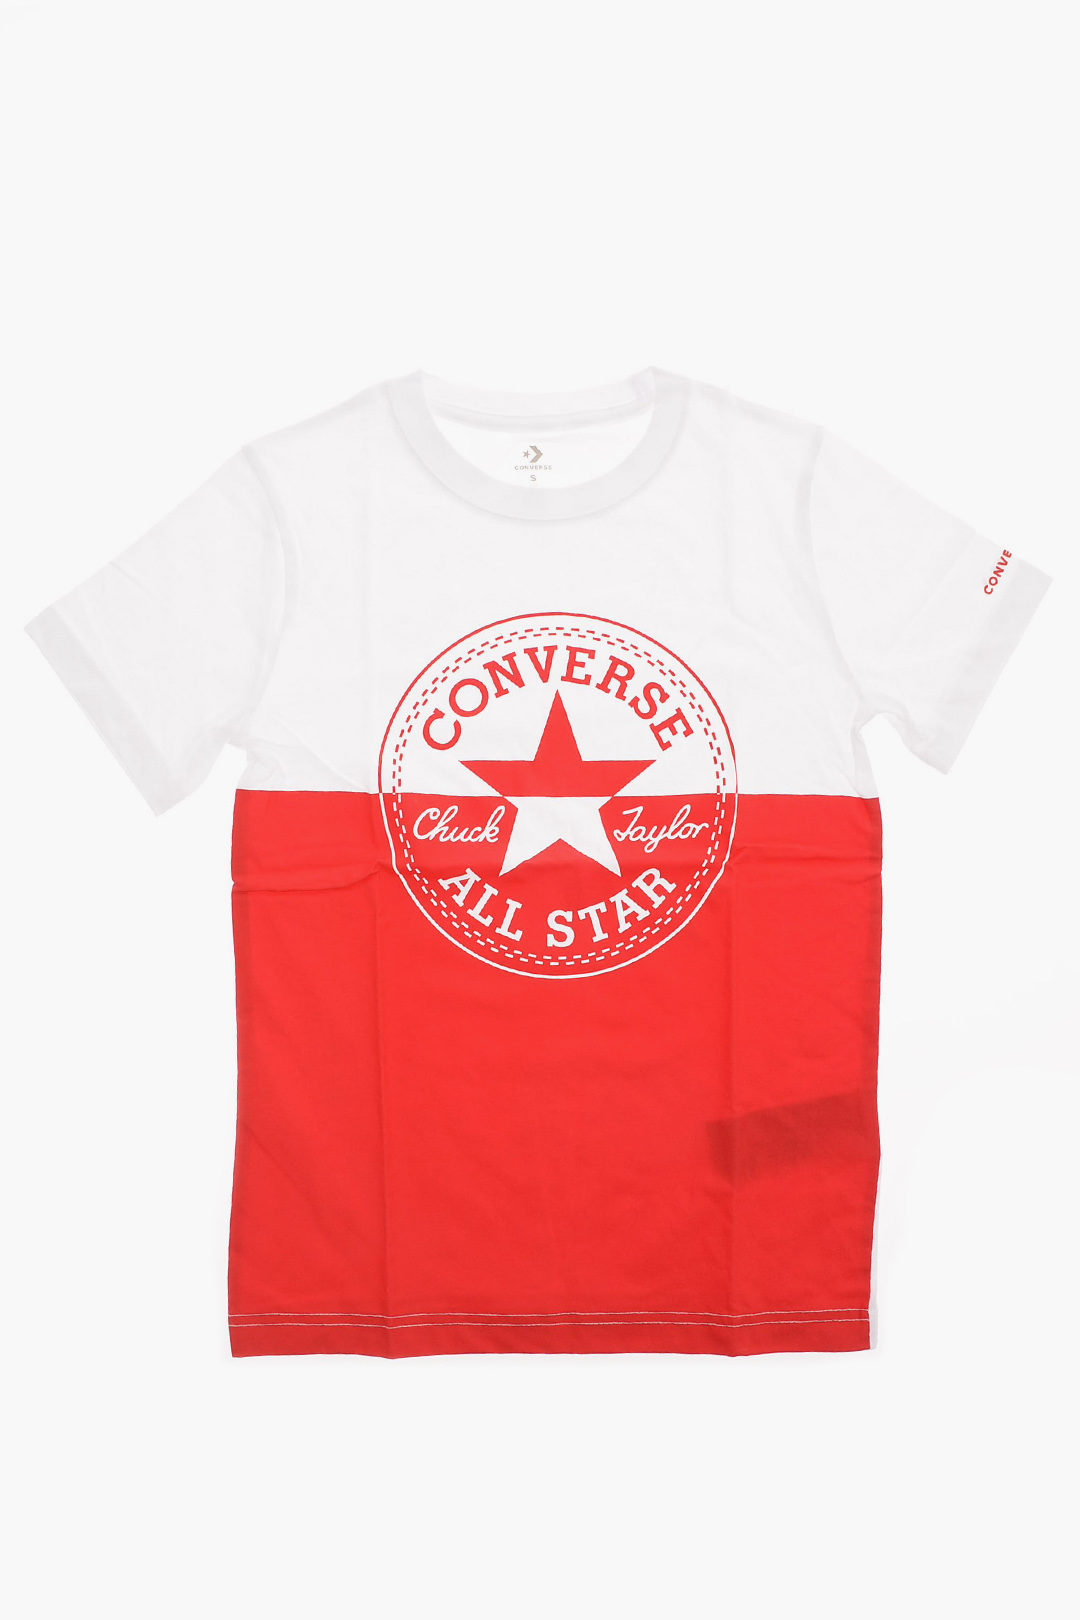 Converse KIDS ALL STAR CHUCK TAYLOR Logo Printed T-Shirt and Leggings Set  girls - Glamood Outlet